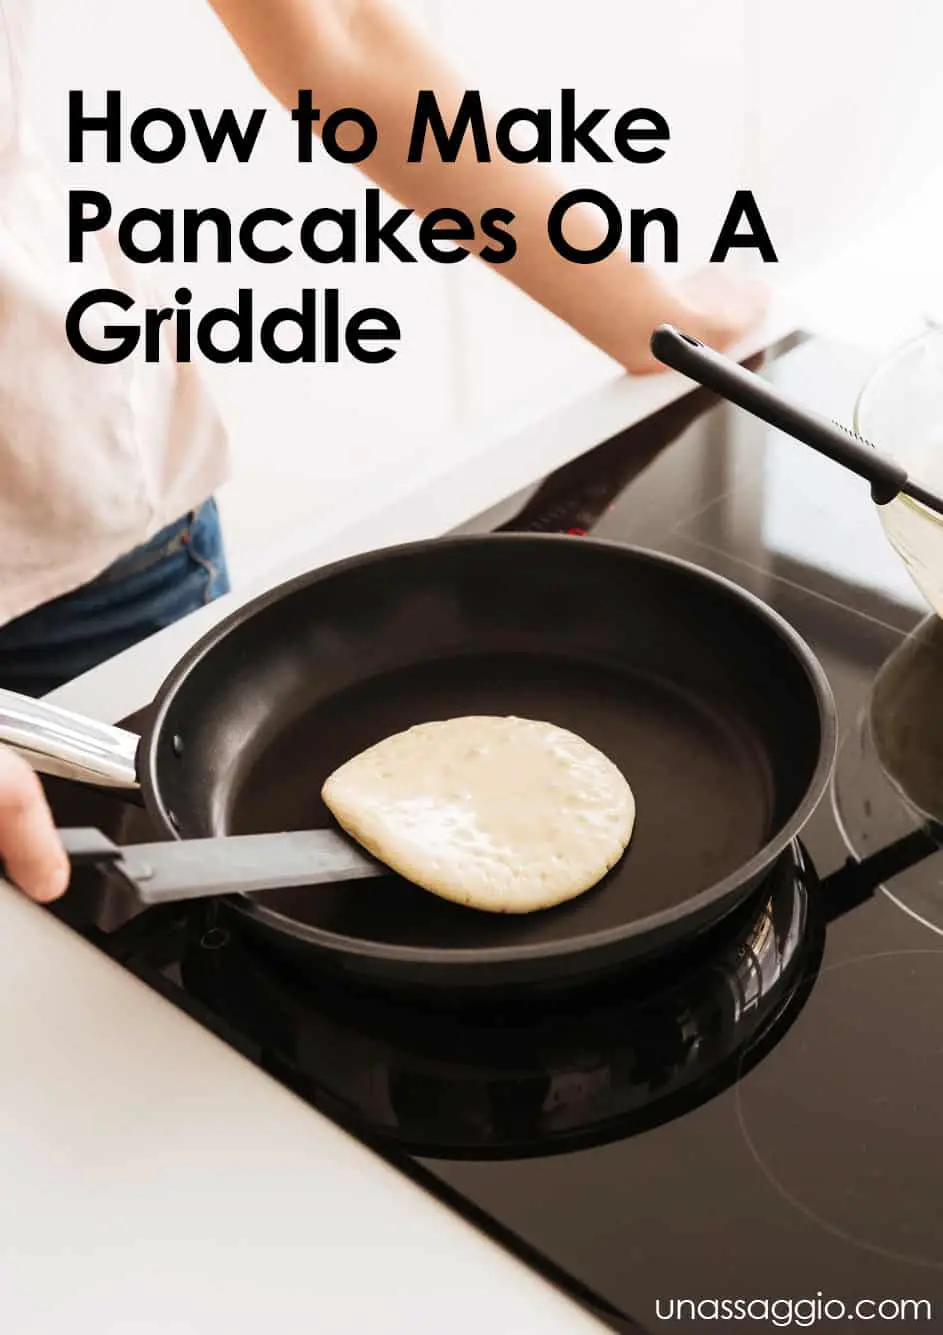 How To Make Pancakes On A Griddle